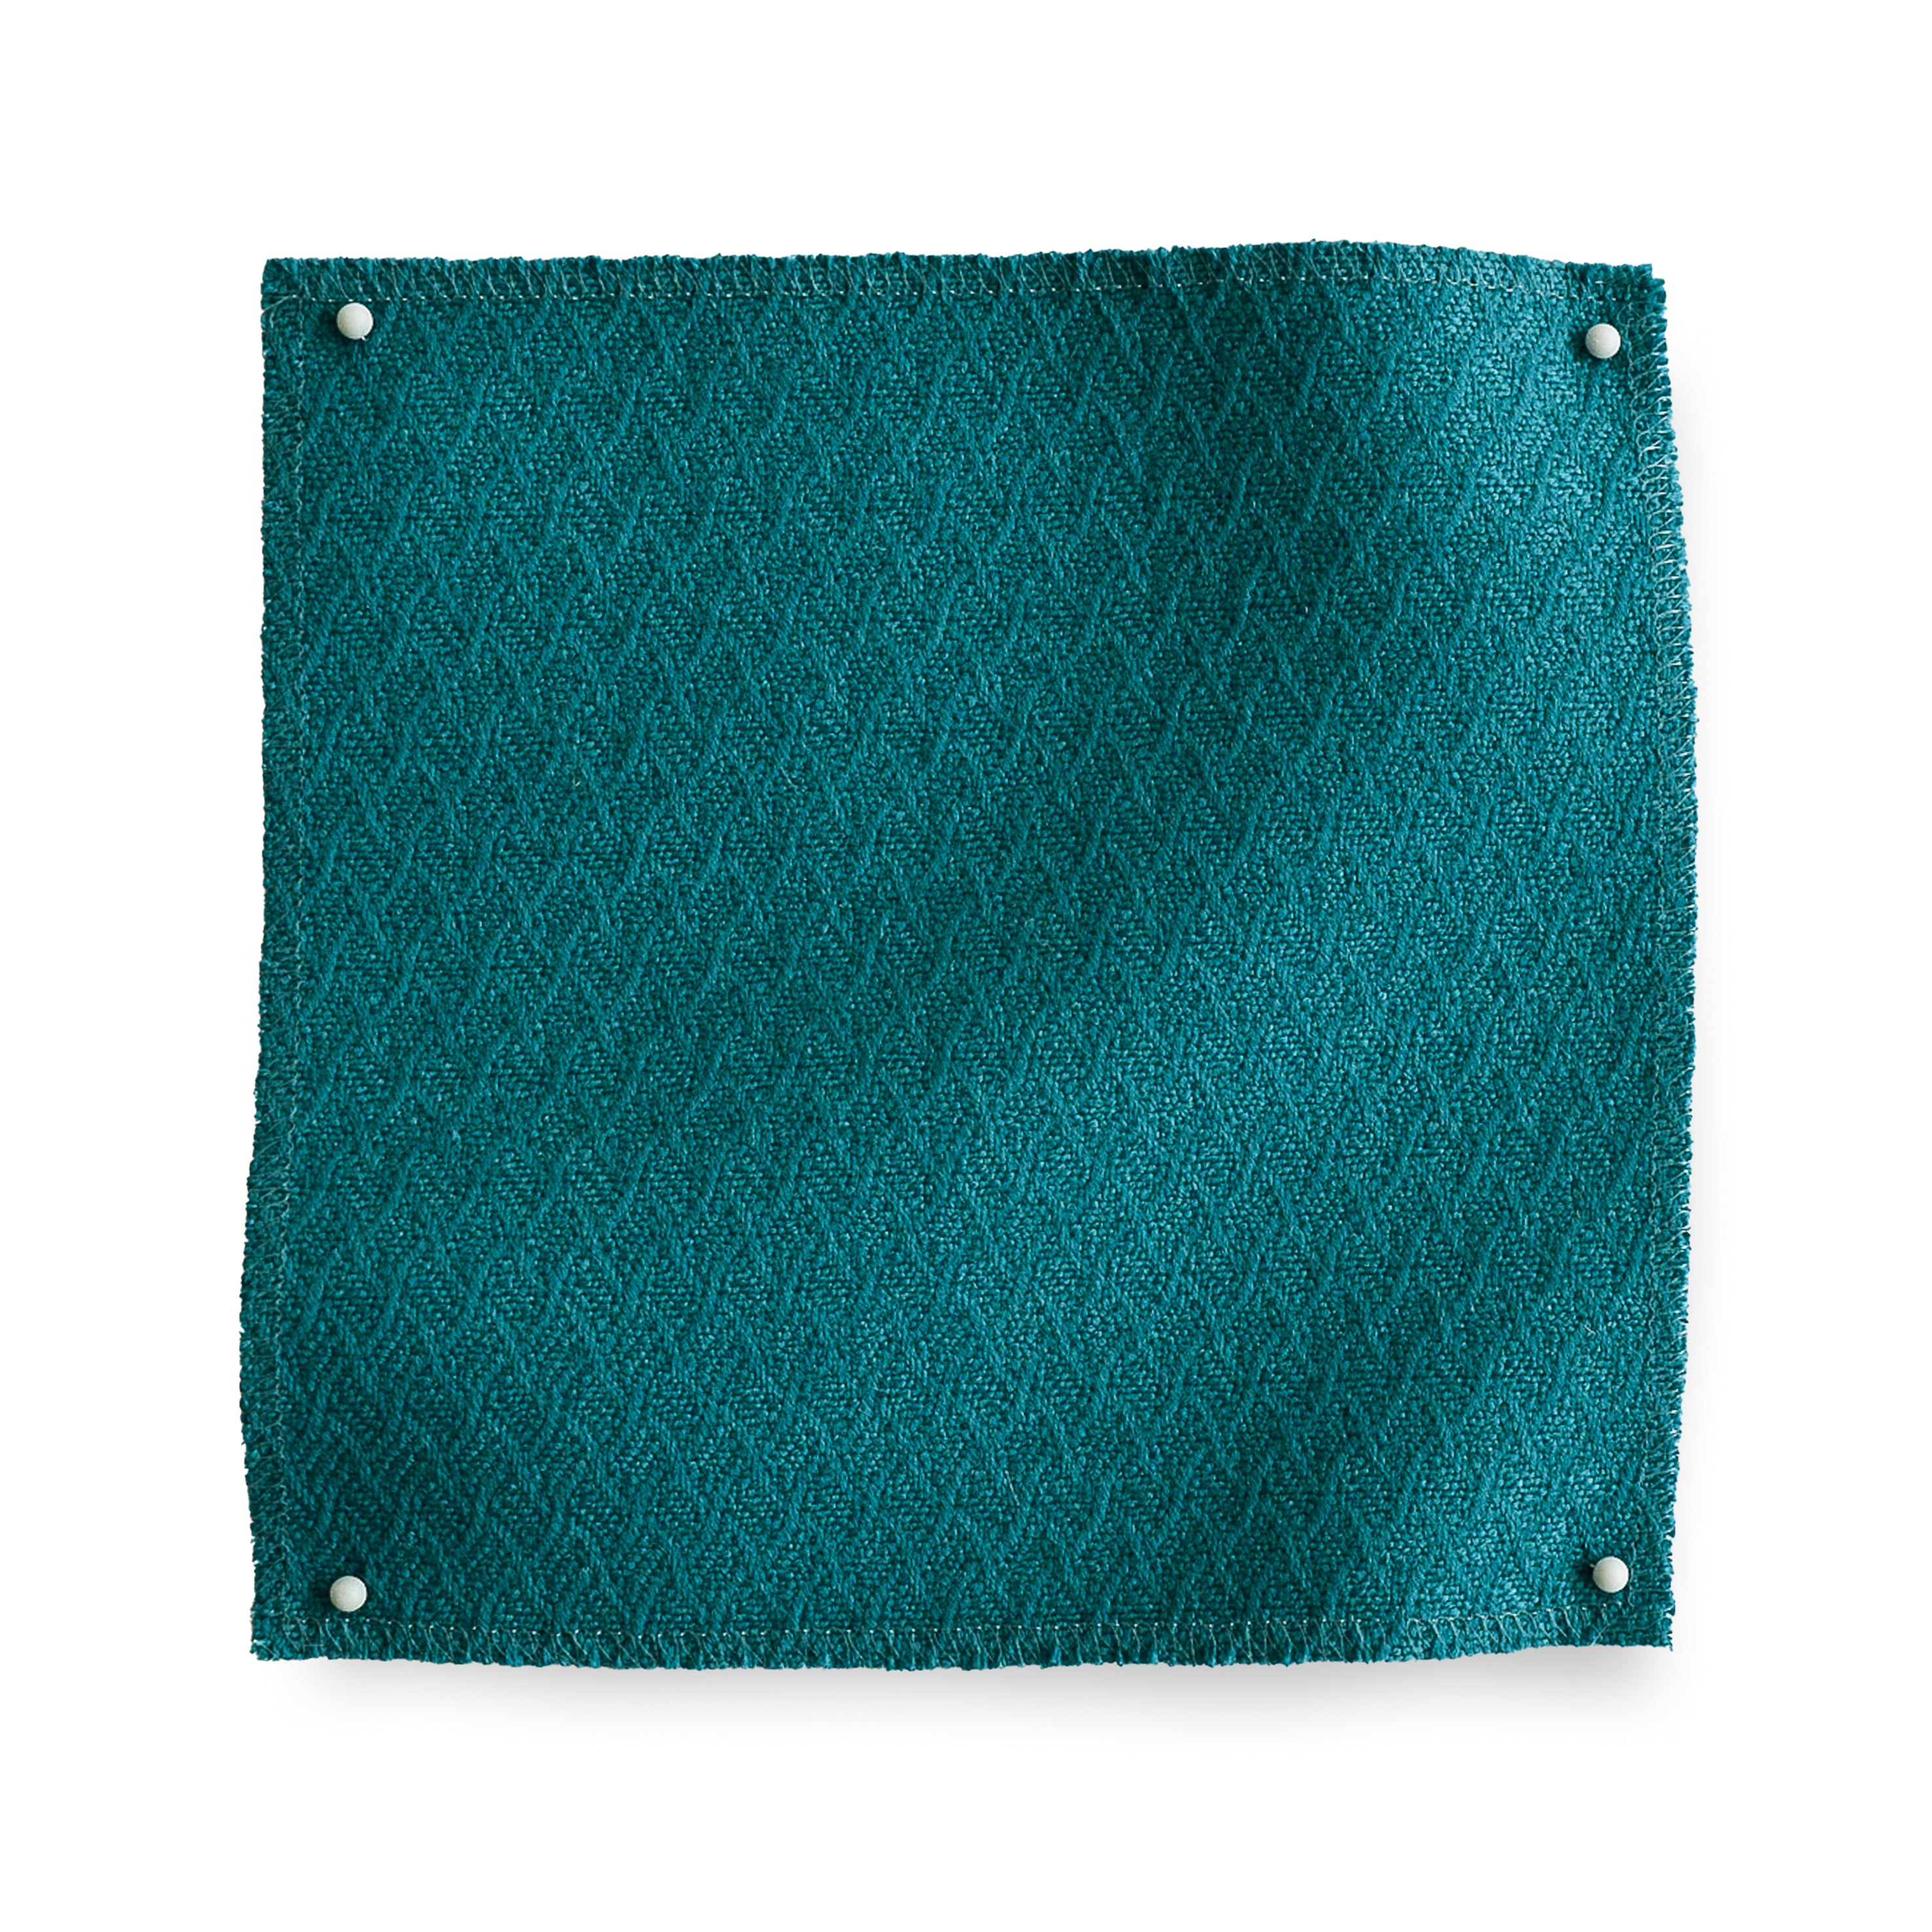 Wool trellis jacquard swatch pinned in all corners in teal